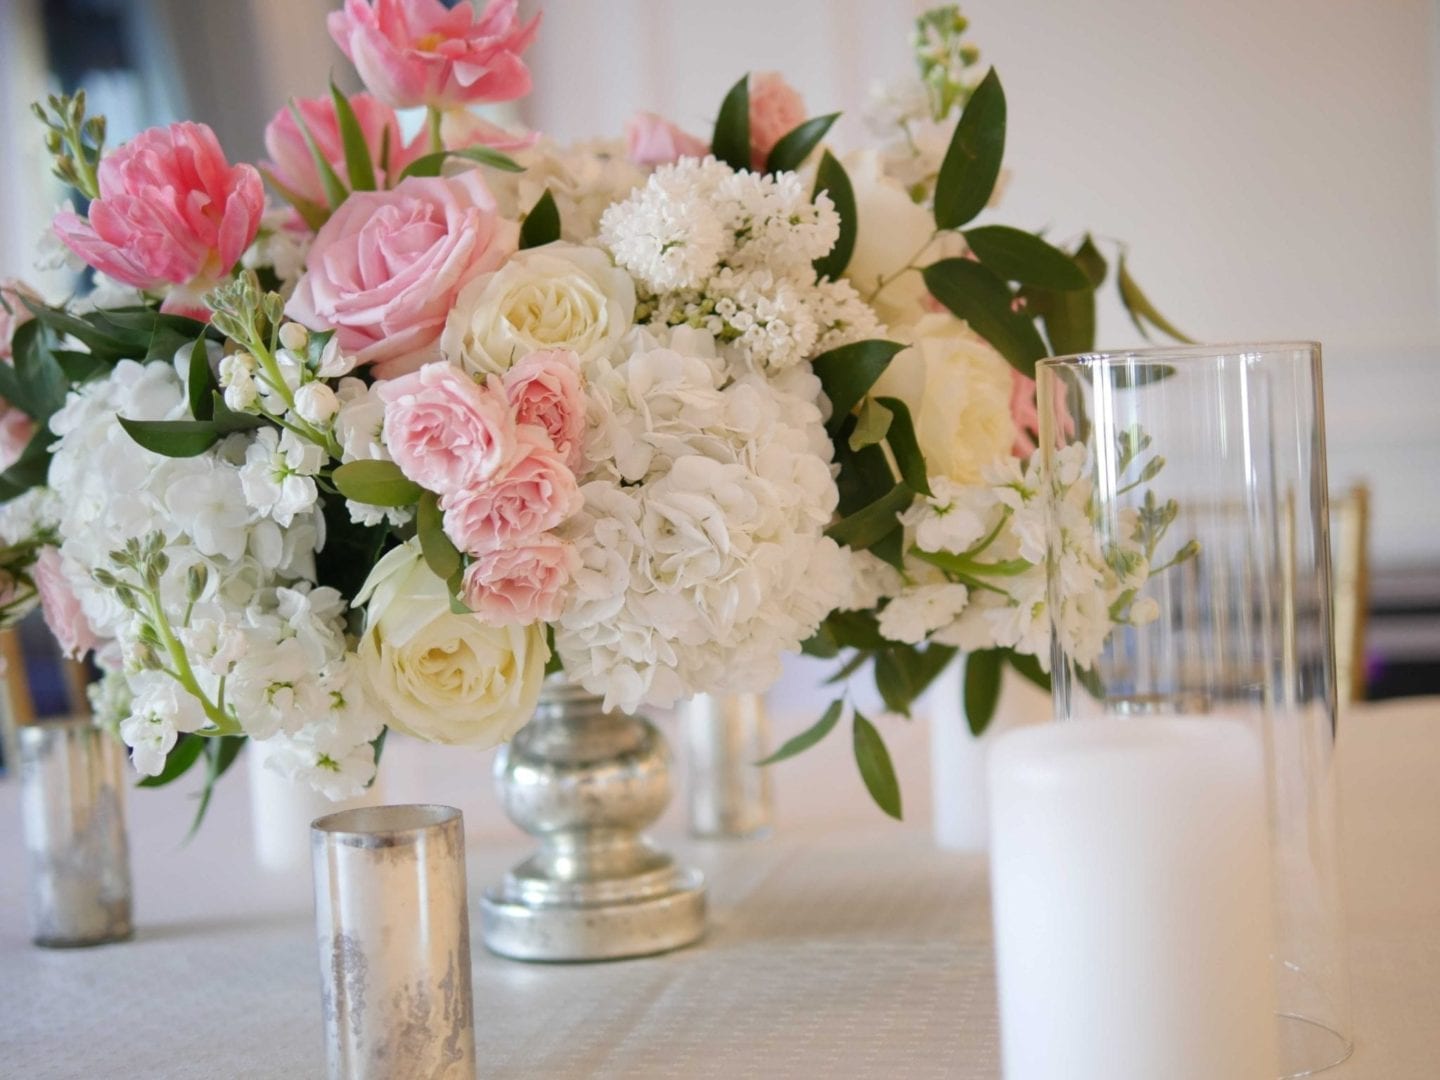 Creating a Wedding Floral Arrangement with silk flowers